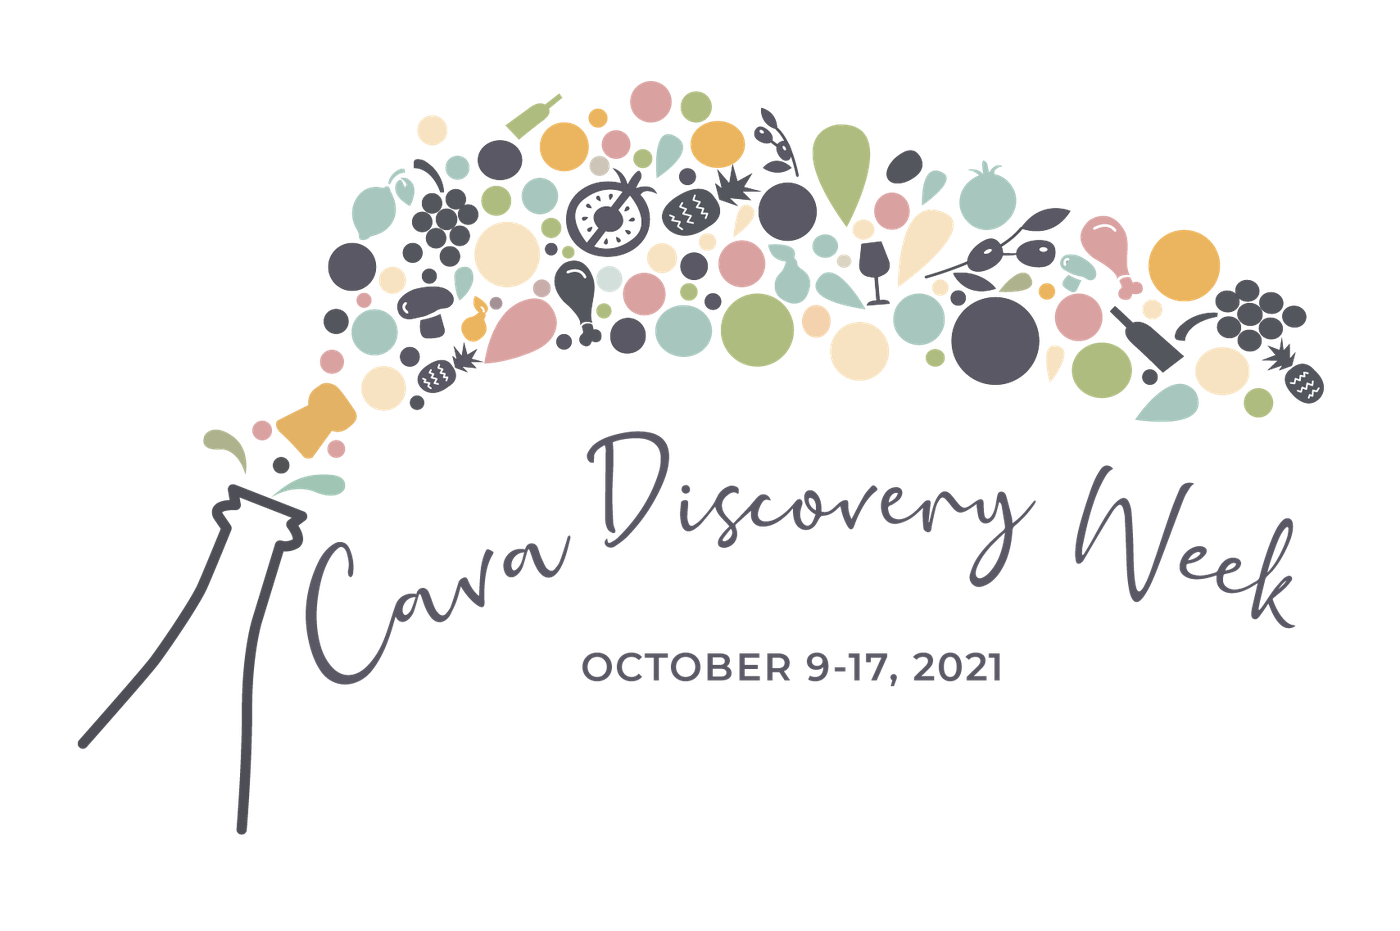 cava discovery week logo_final-dates-03.png